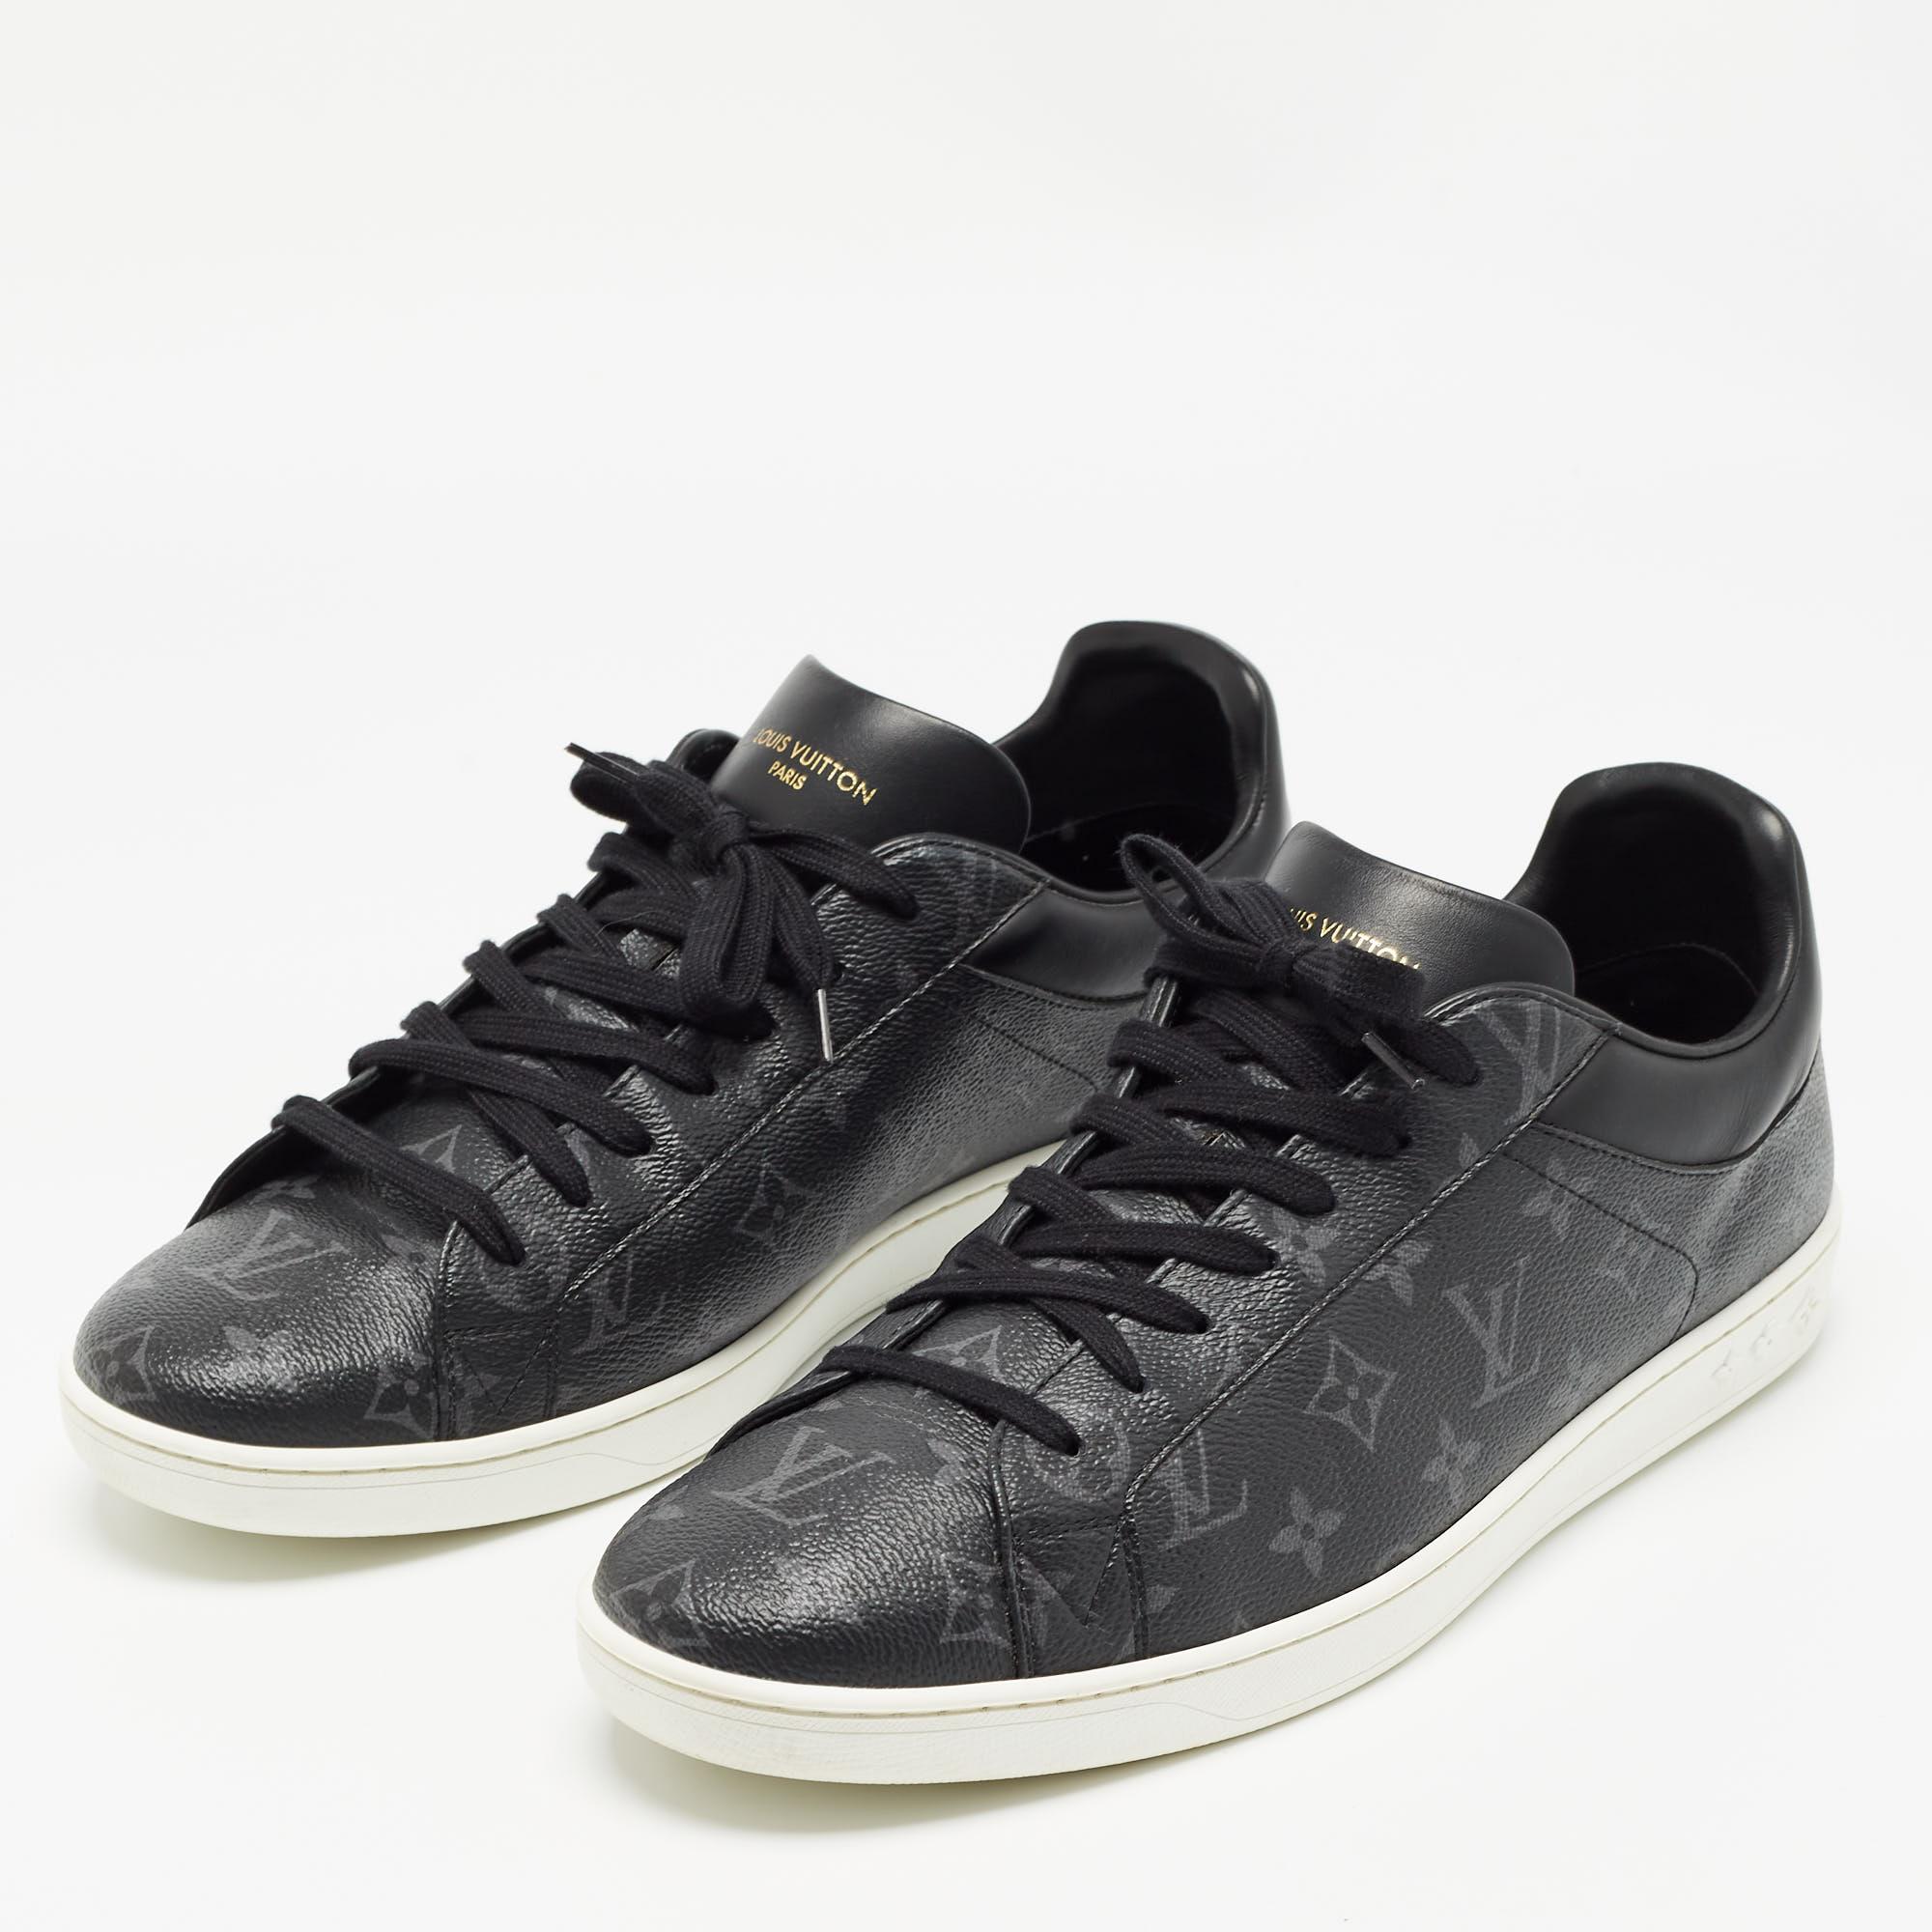 Louis Vuitton Monogram Eclipse Luxembourg Sneakers Size 46 For Sale 2